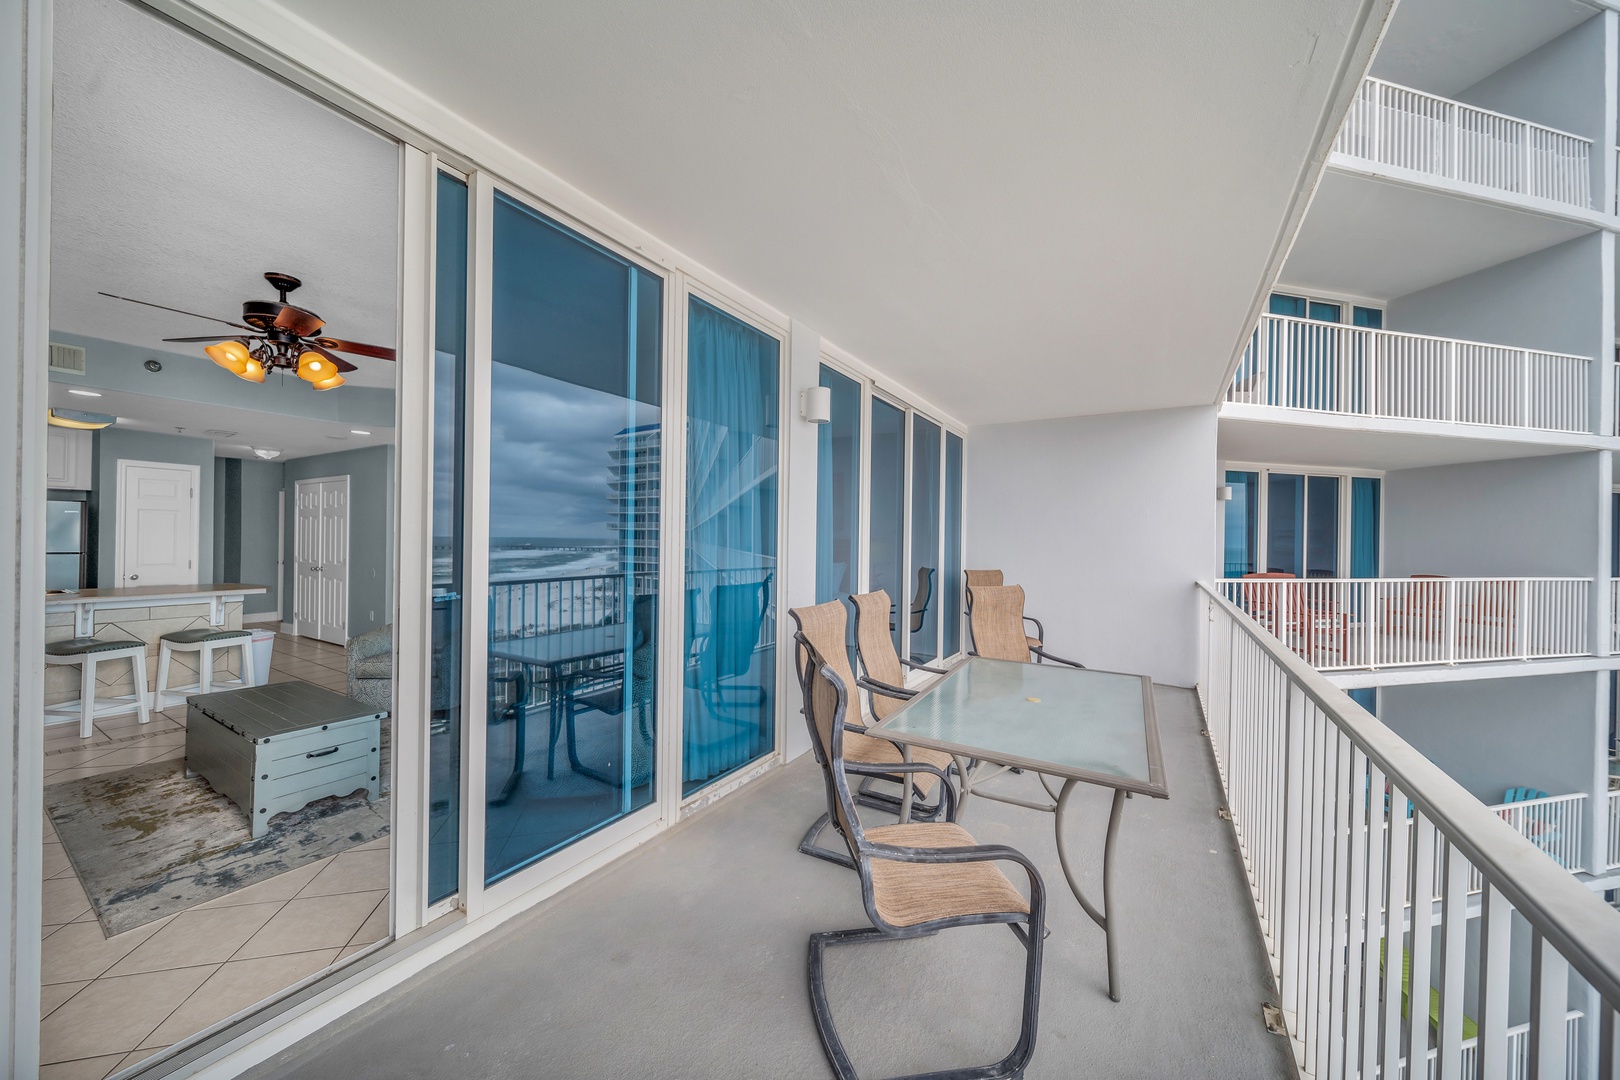 Step into our condo, and let the breathtaking wall of floor-to-ceiling windows unveil the stunning Gulf of Mexico before your eyes.